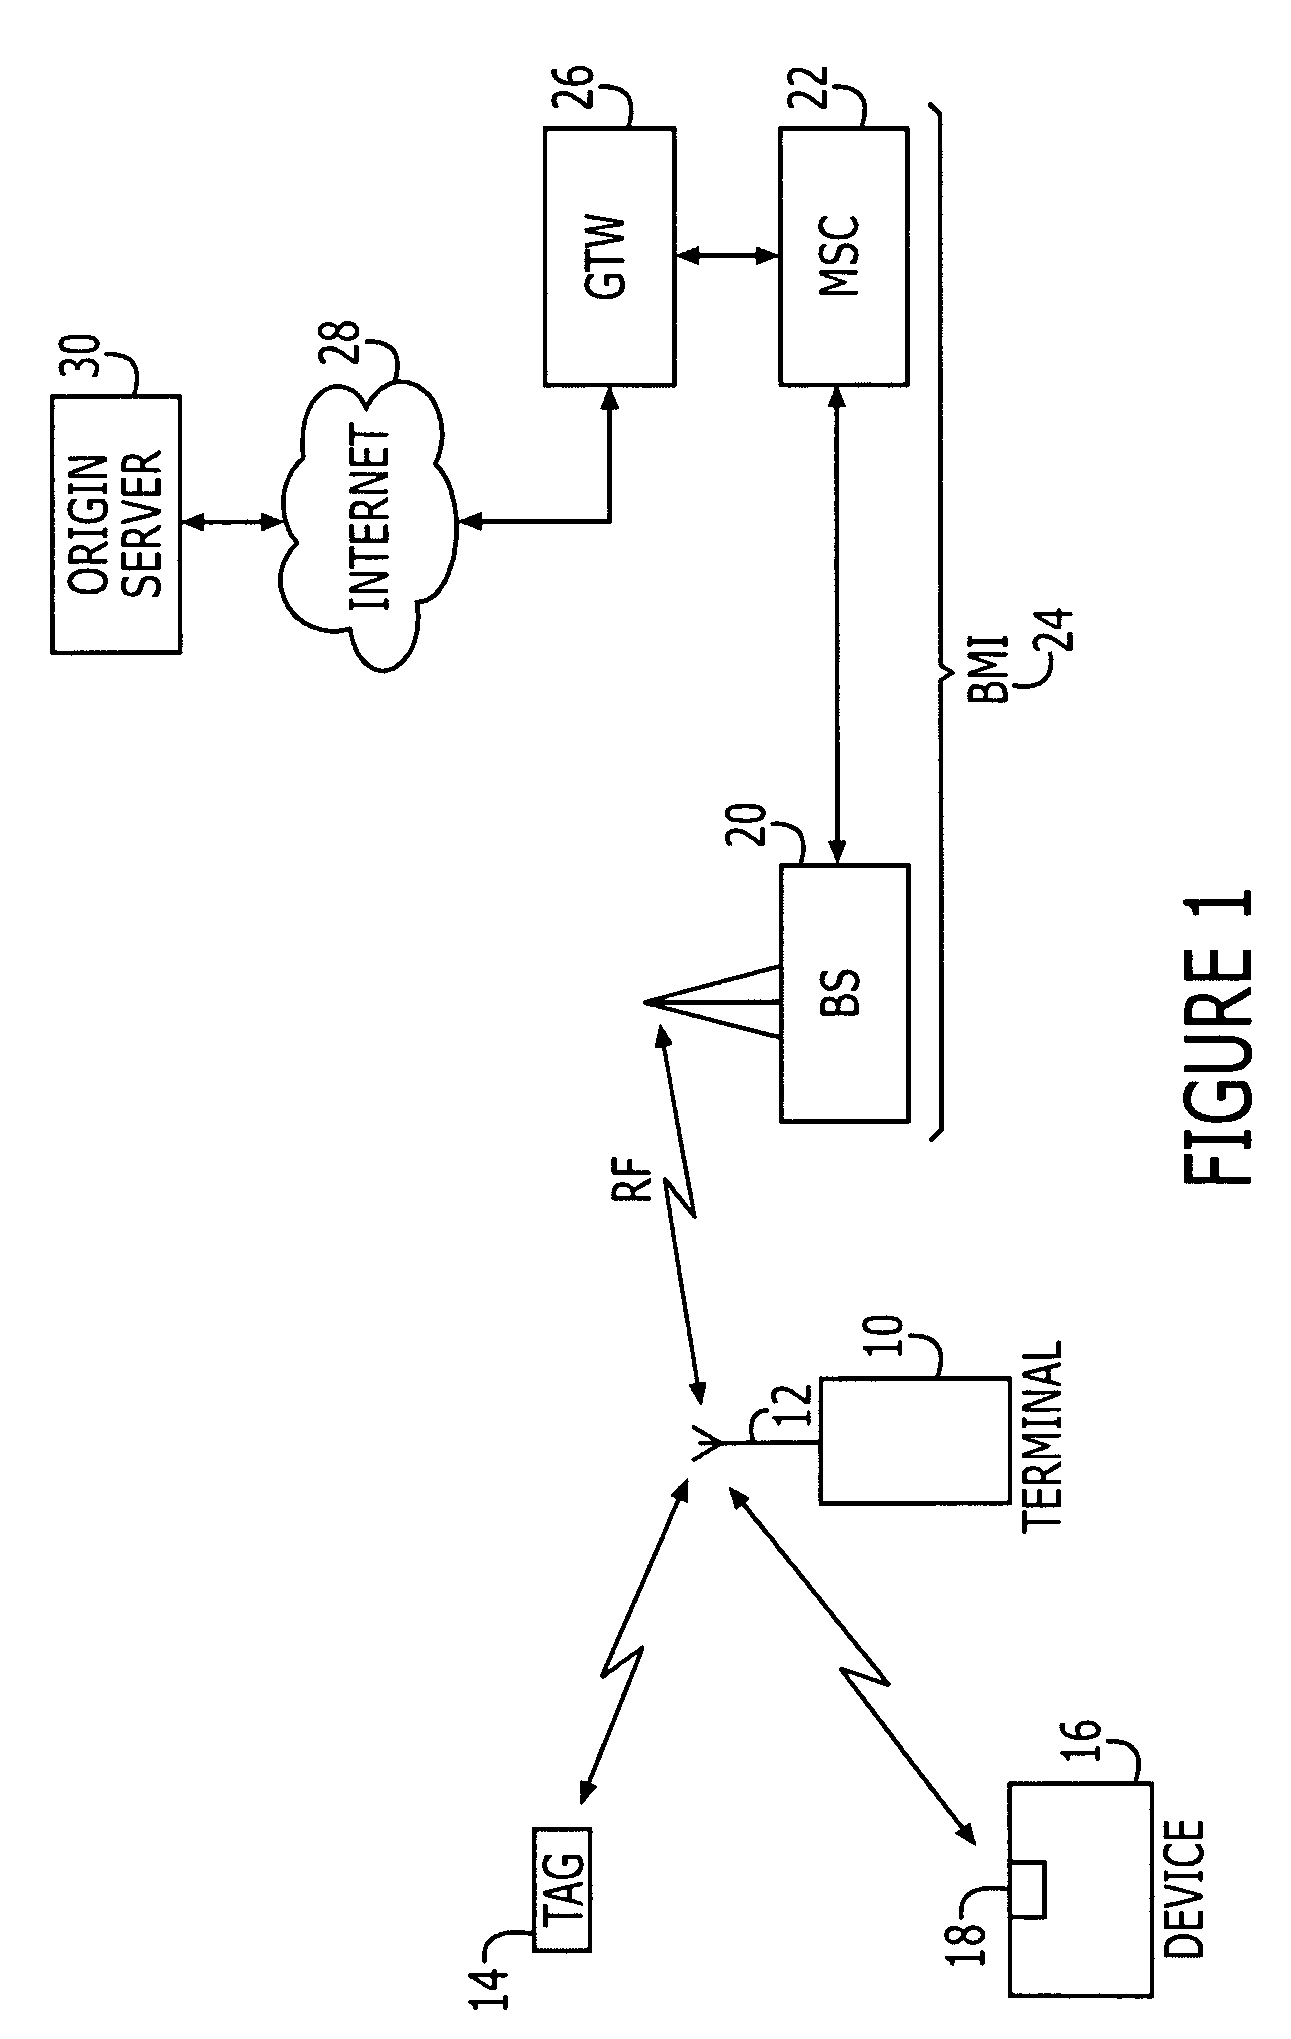 Methods, apparatus and computer program instructions for enhancing service discovery at a mobile terminal